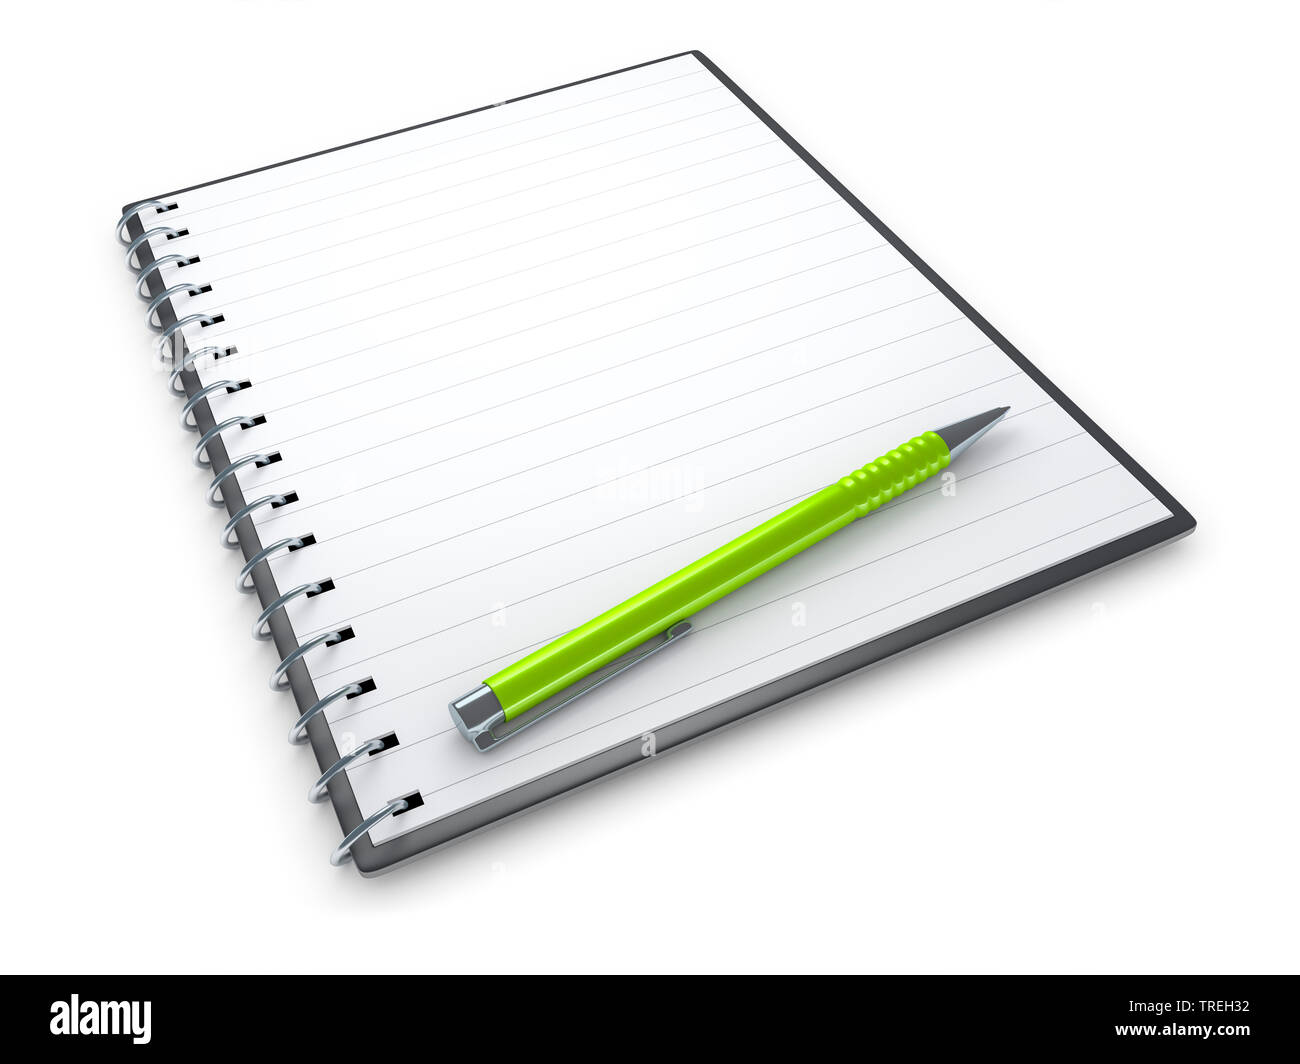 3D computer graphic, pen on top of an empty white spiral writing pad against white background, Europe Stock Photo